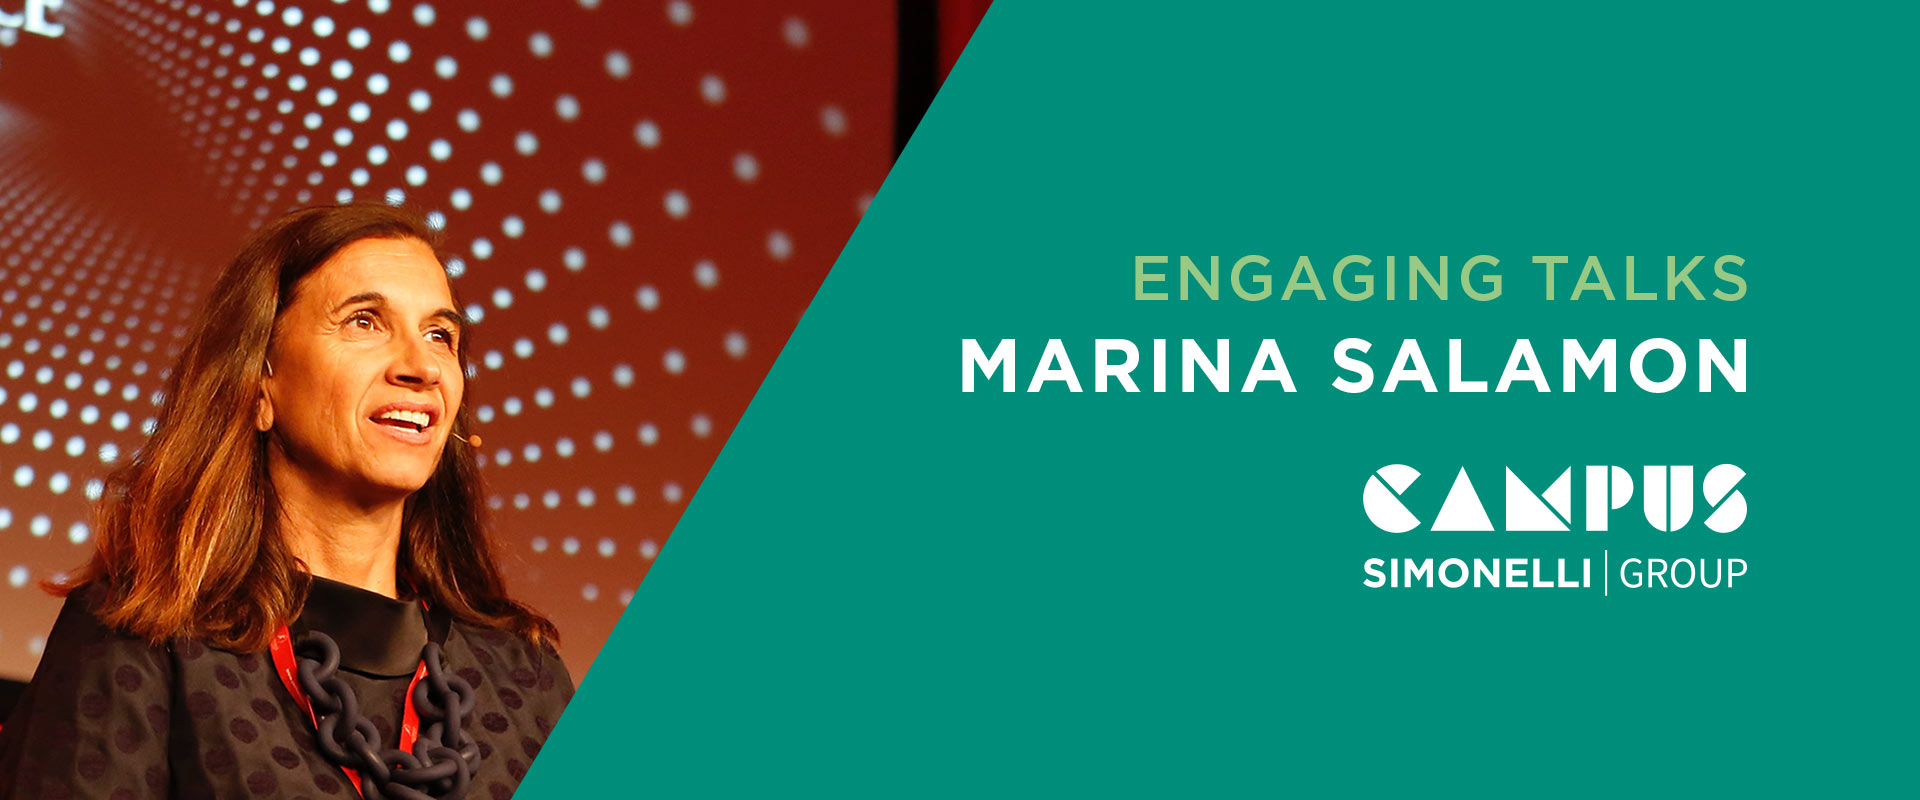 First appointment at the Simonelli Group Campus:  Engaging Talks welcomes Marina Salamon